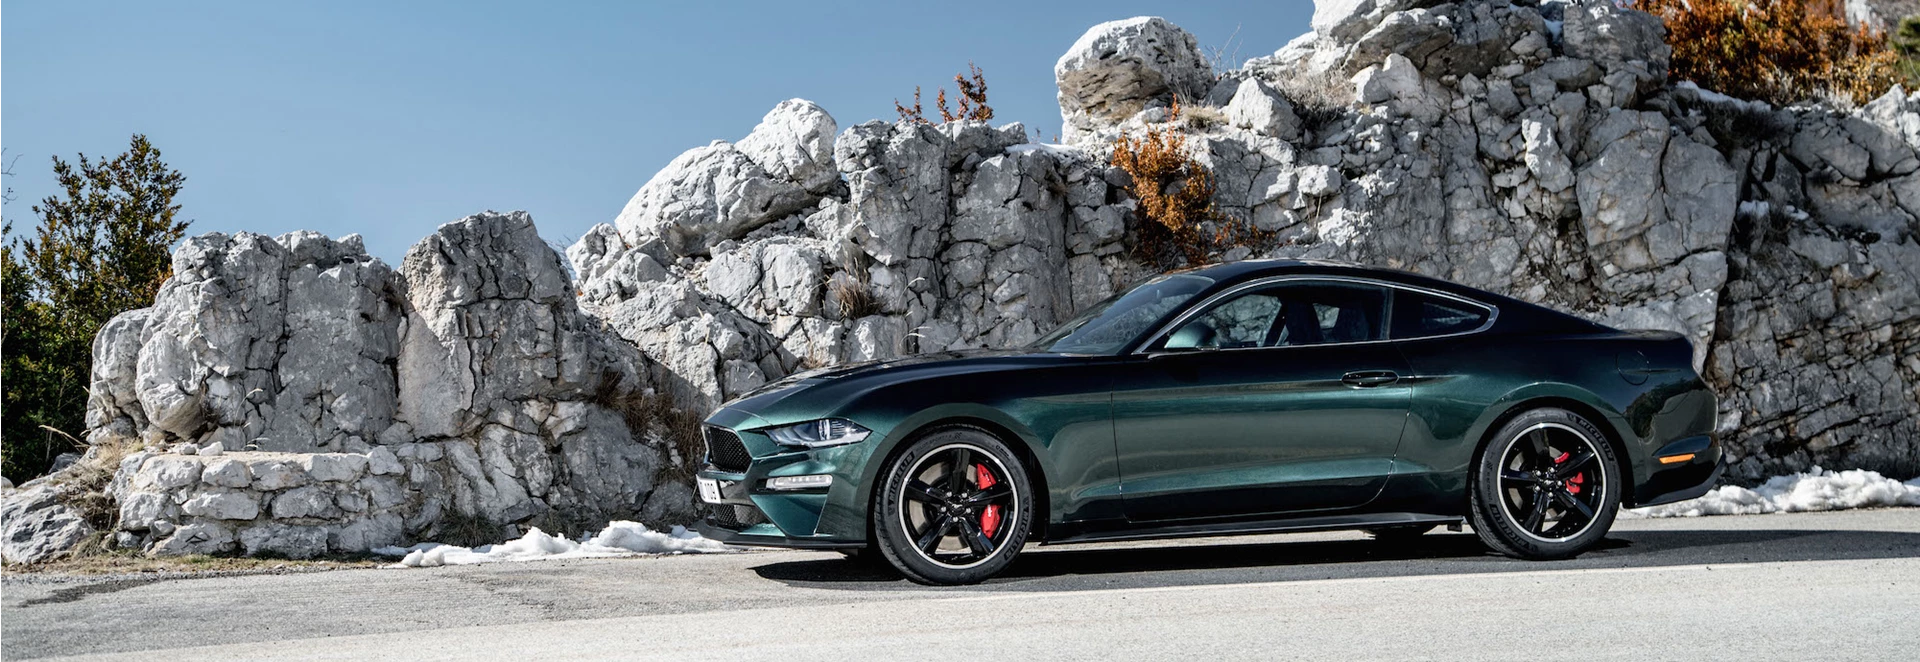 Pricing revealed for special edition 2019 Ford Mustang Bullitt